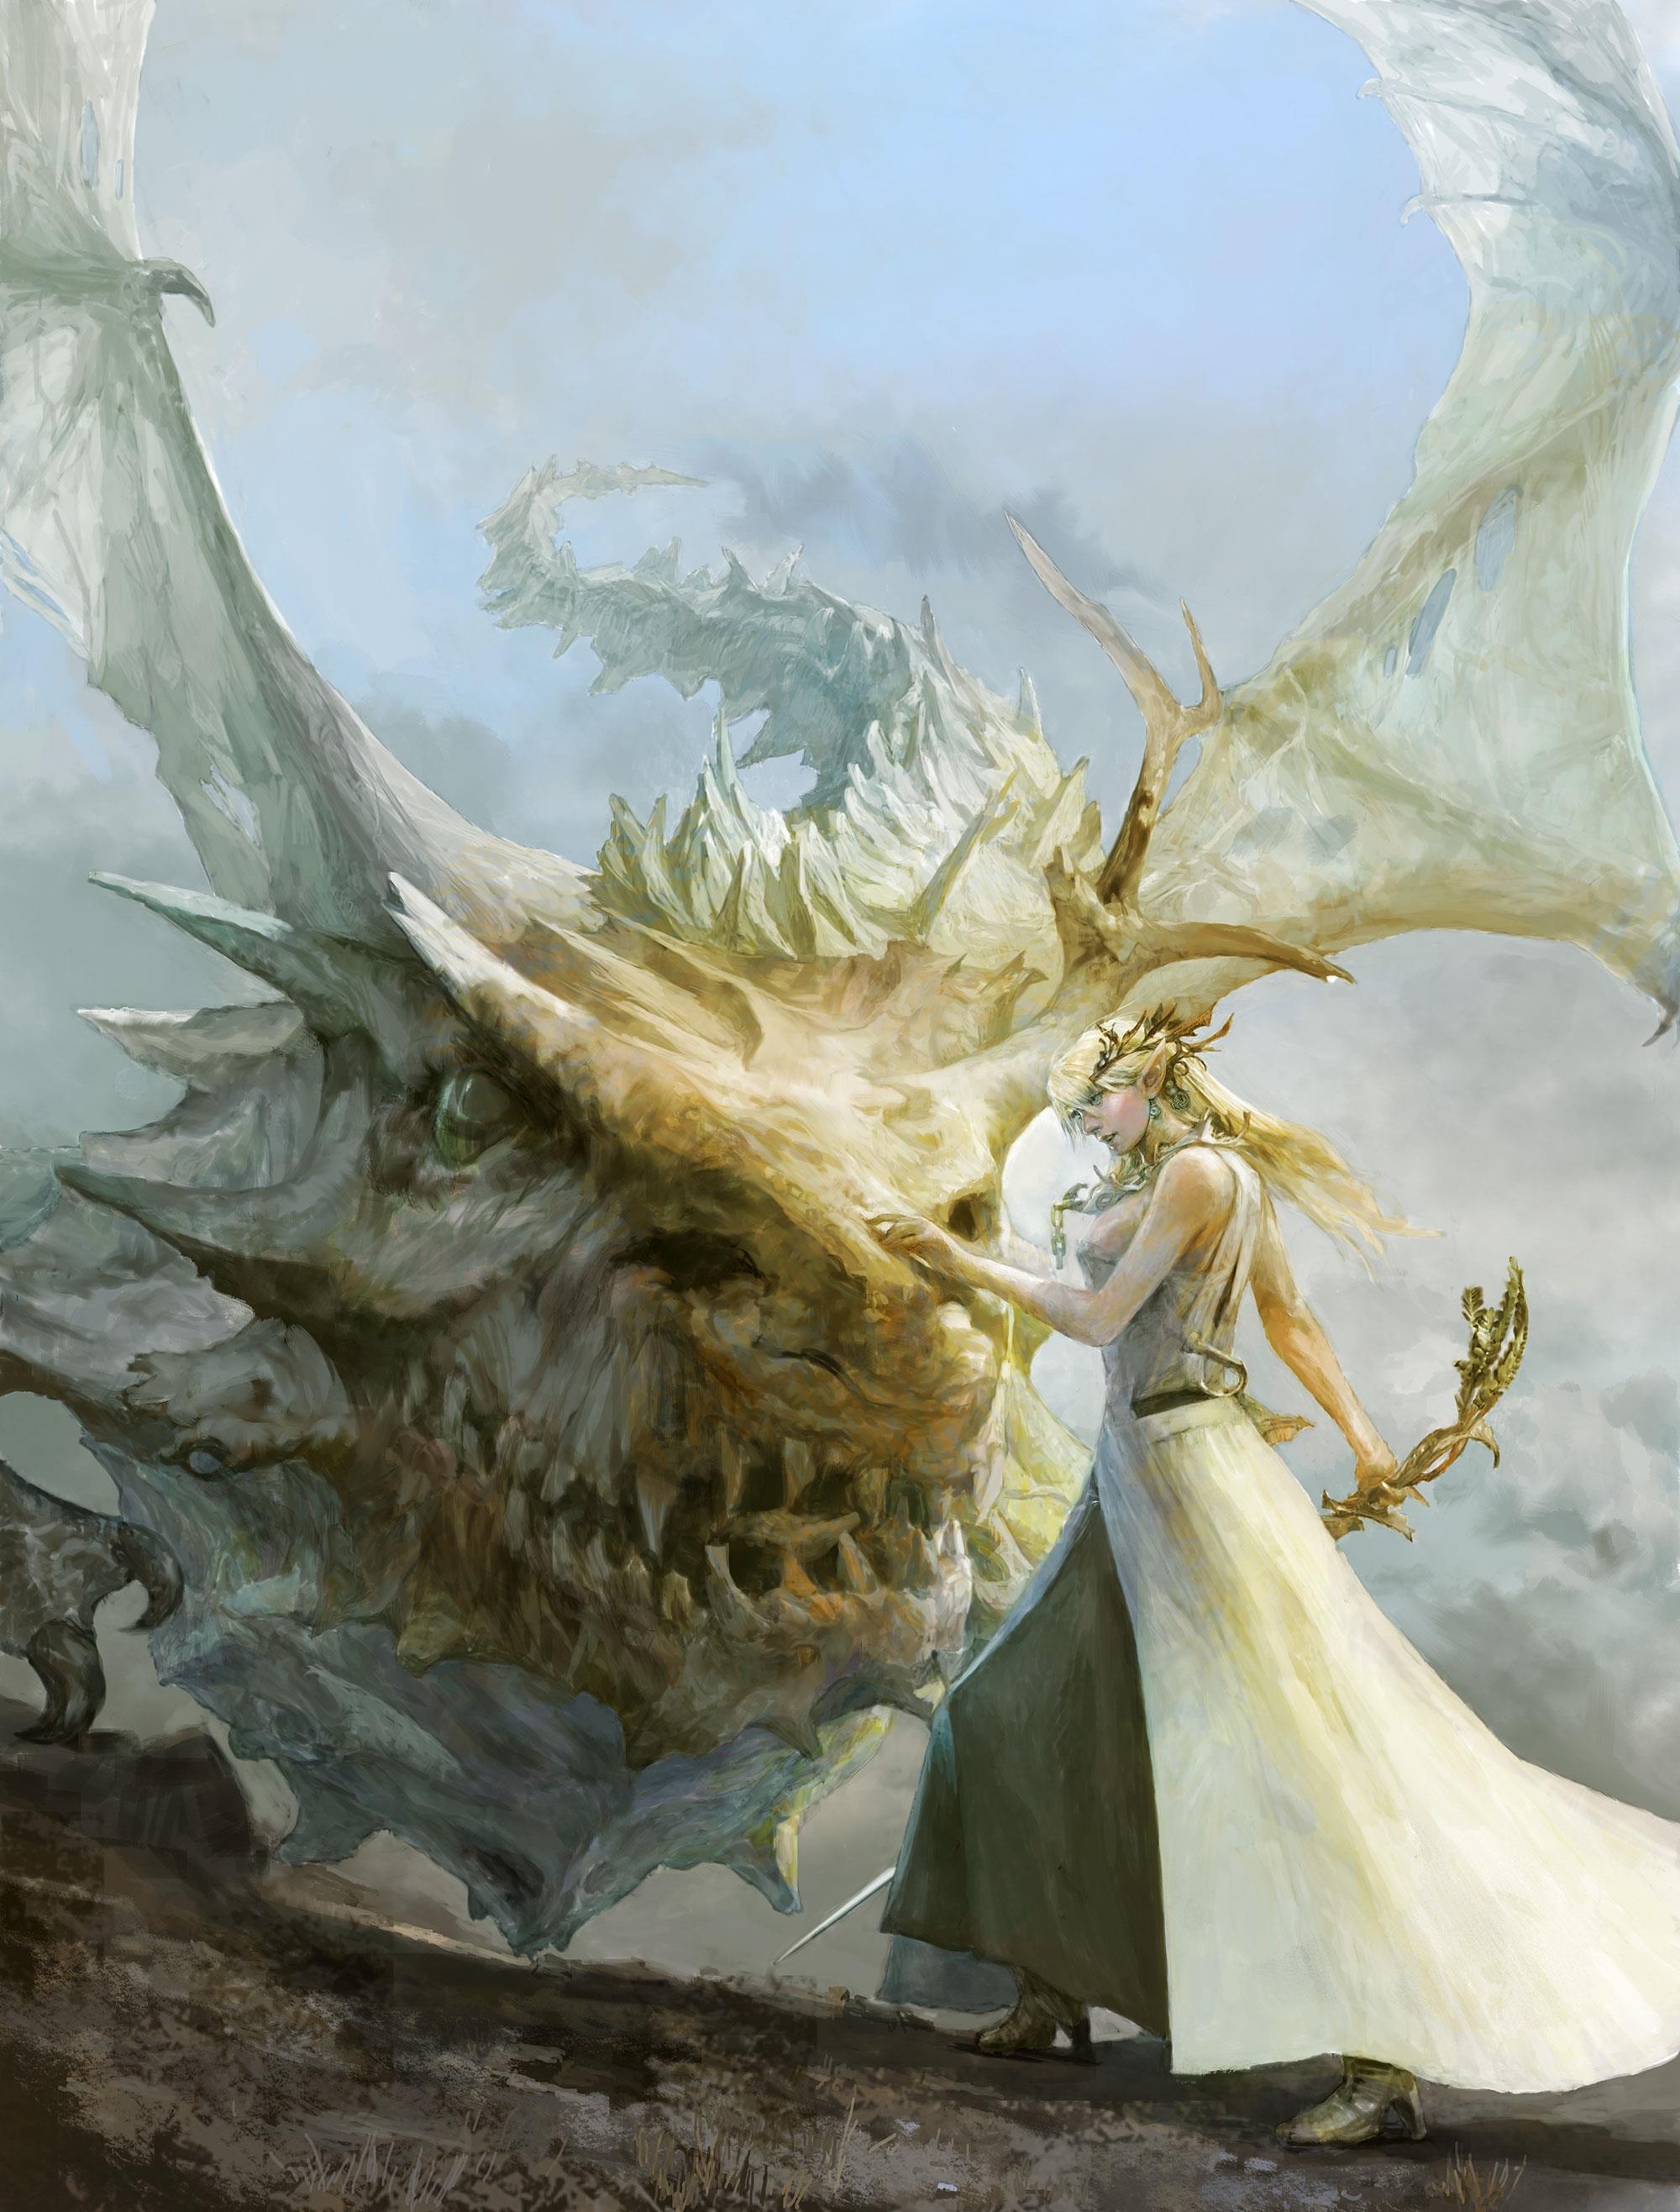 Image for Project Prelude Rune is a new Square Enix RPG from Tales series producer Hideo Baba